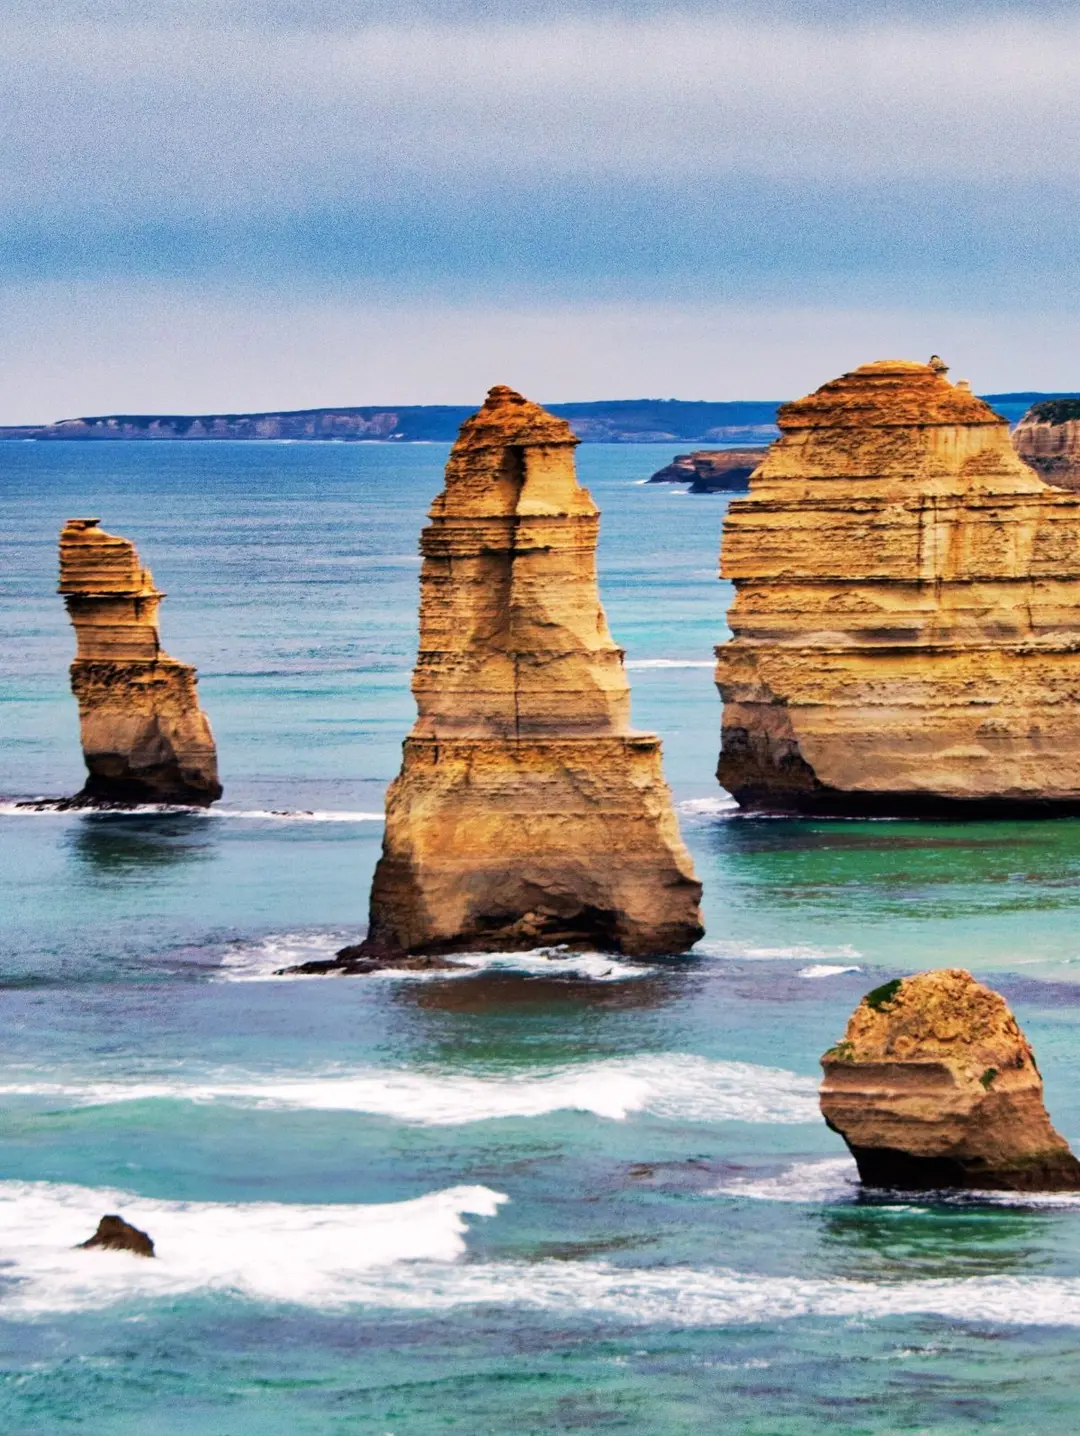 An image of 4 of the limestone pillars of 12 Apostles in Great Ocean Road, daytime, 3x4 aspect ratio.